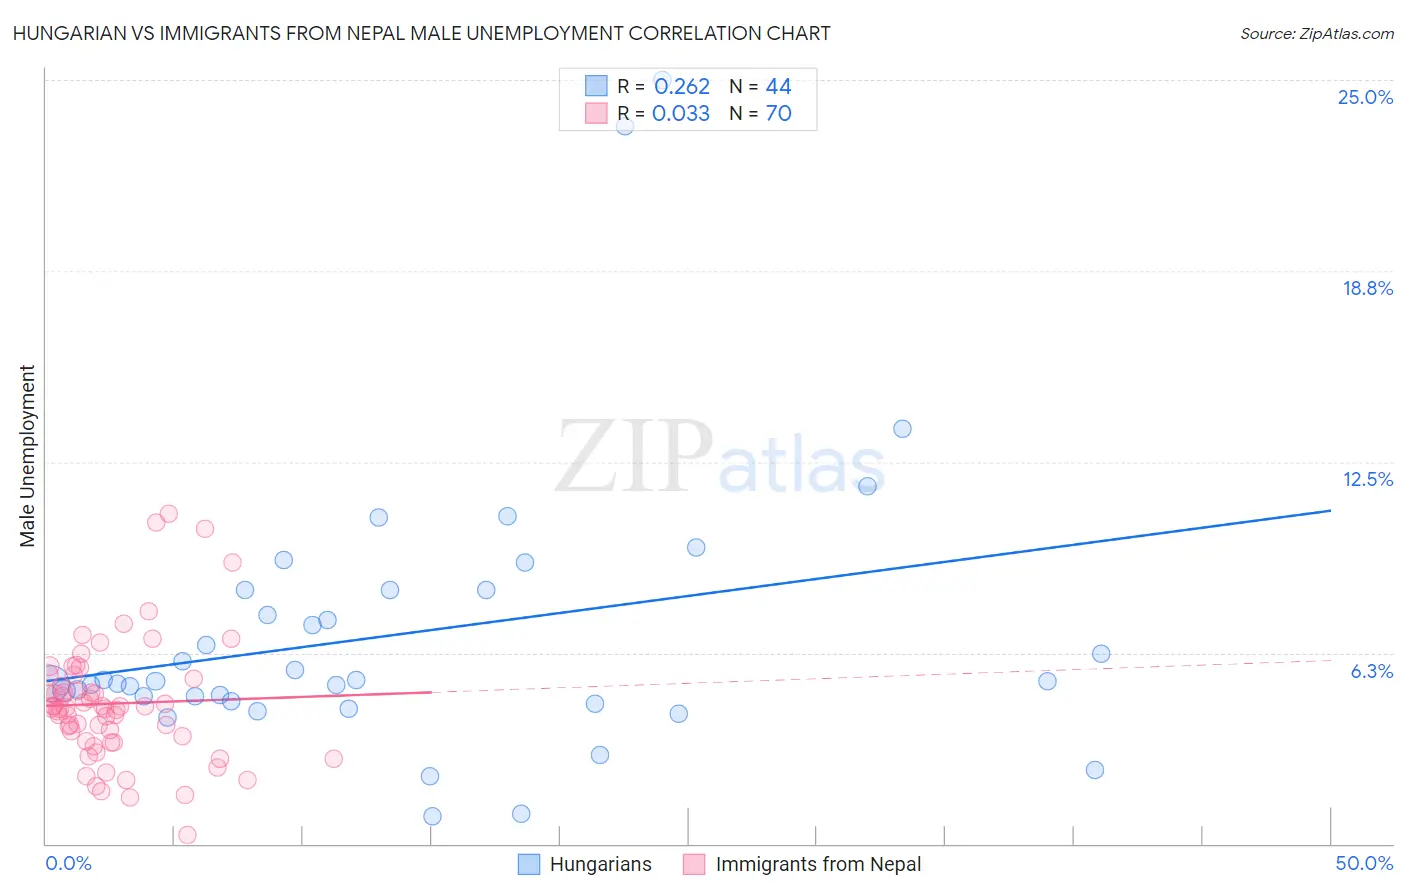 Hungarian vs Immigrants from Nepal Male Unemployment